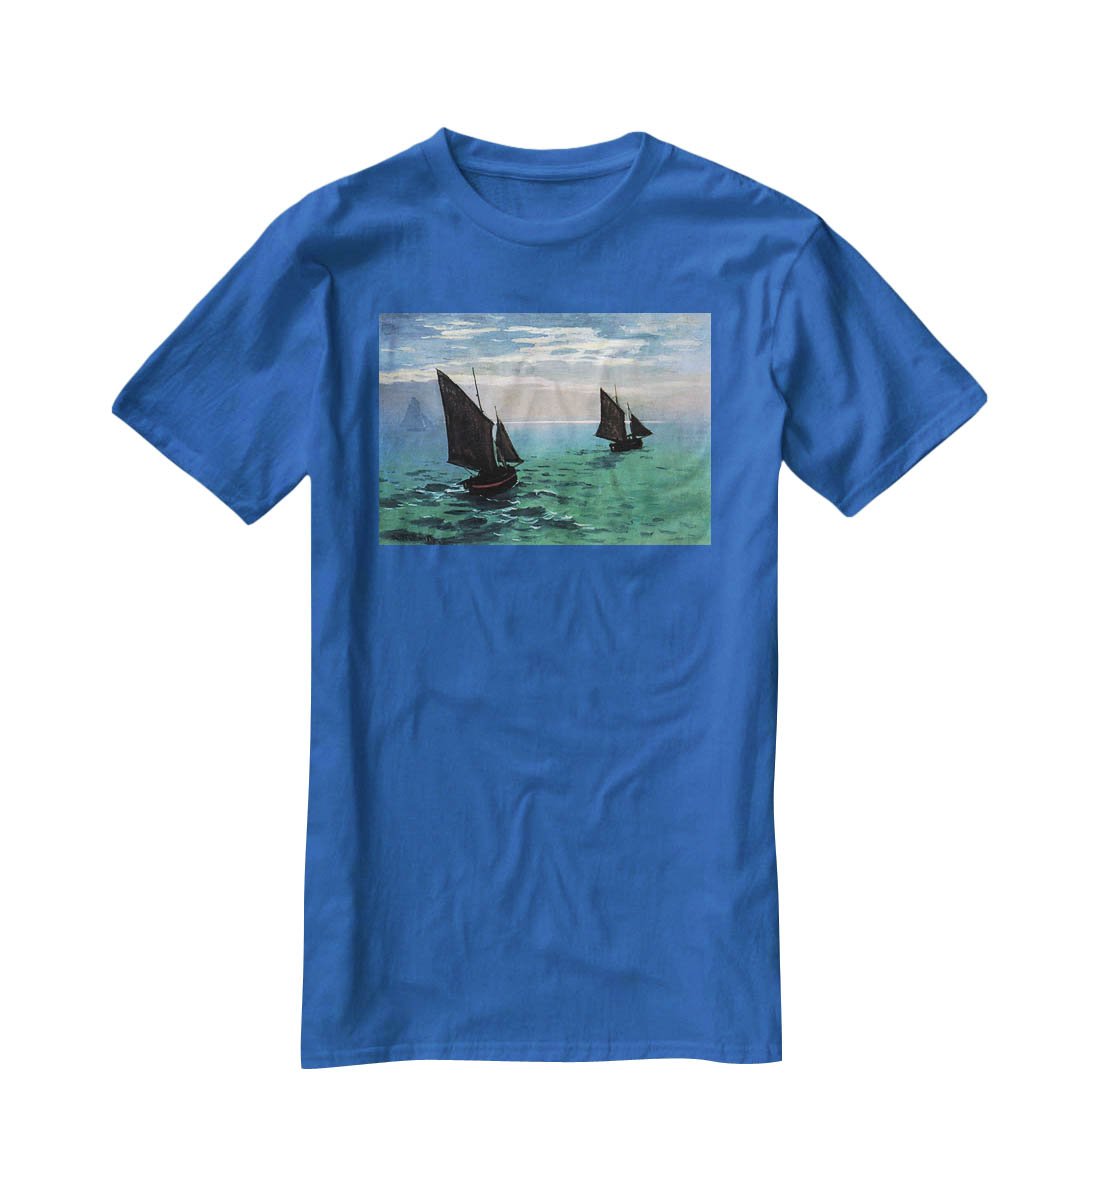 Le Havre exit the fishing boats from the port by Monet T-Shirt - Canvas Art Rocks - 2